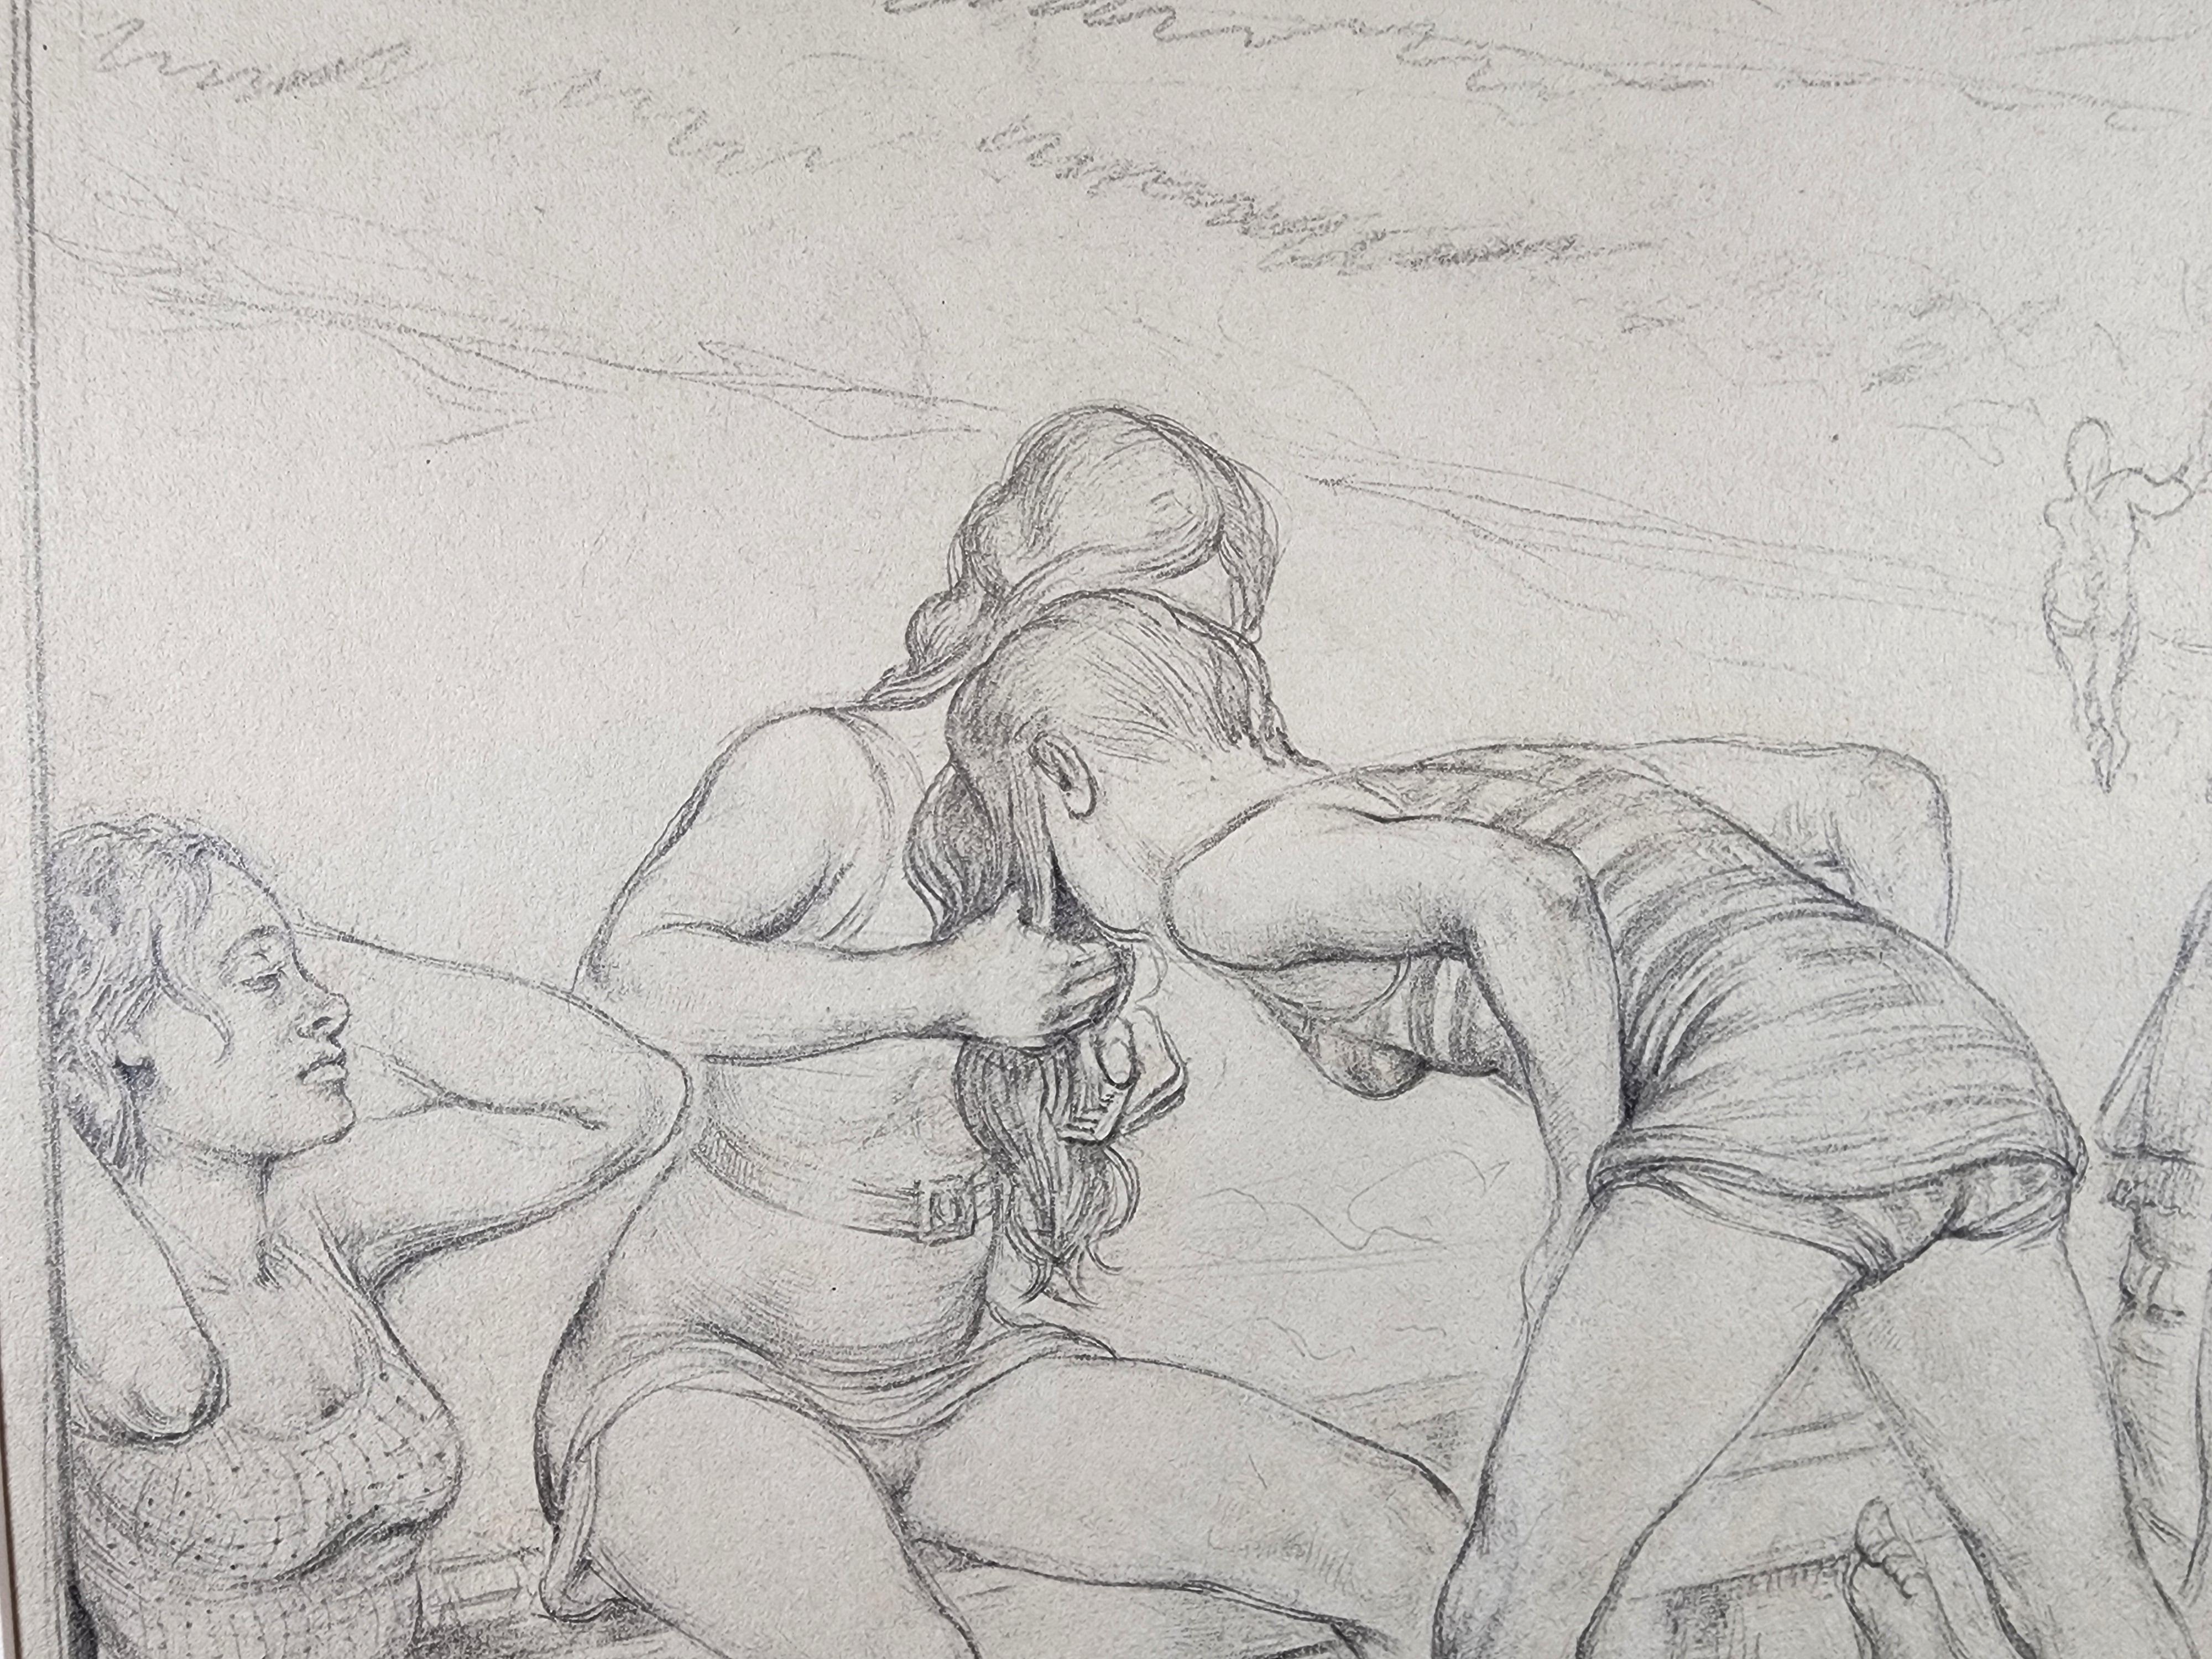 RGRFineArts is pleased to offer this fine pencil drawing of young people enjoing the beach by Carl Pickhardt done in the 1930s.
This picture illustrates the fine craftsmanship that Pickhardt was known for.
Initialed CP at lower right in the image.

